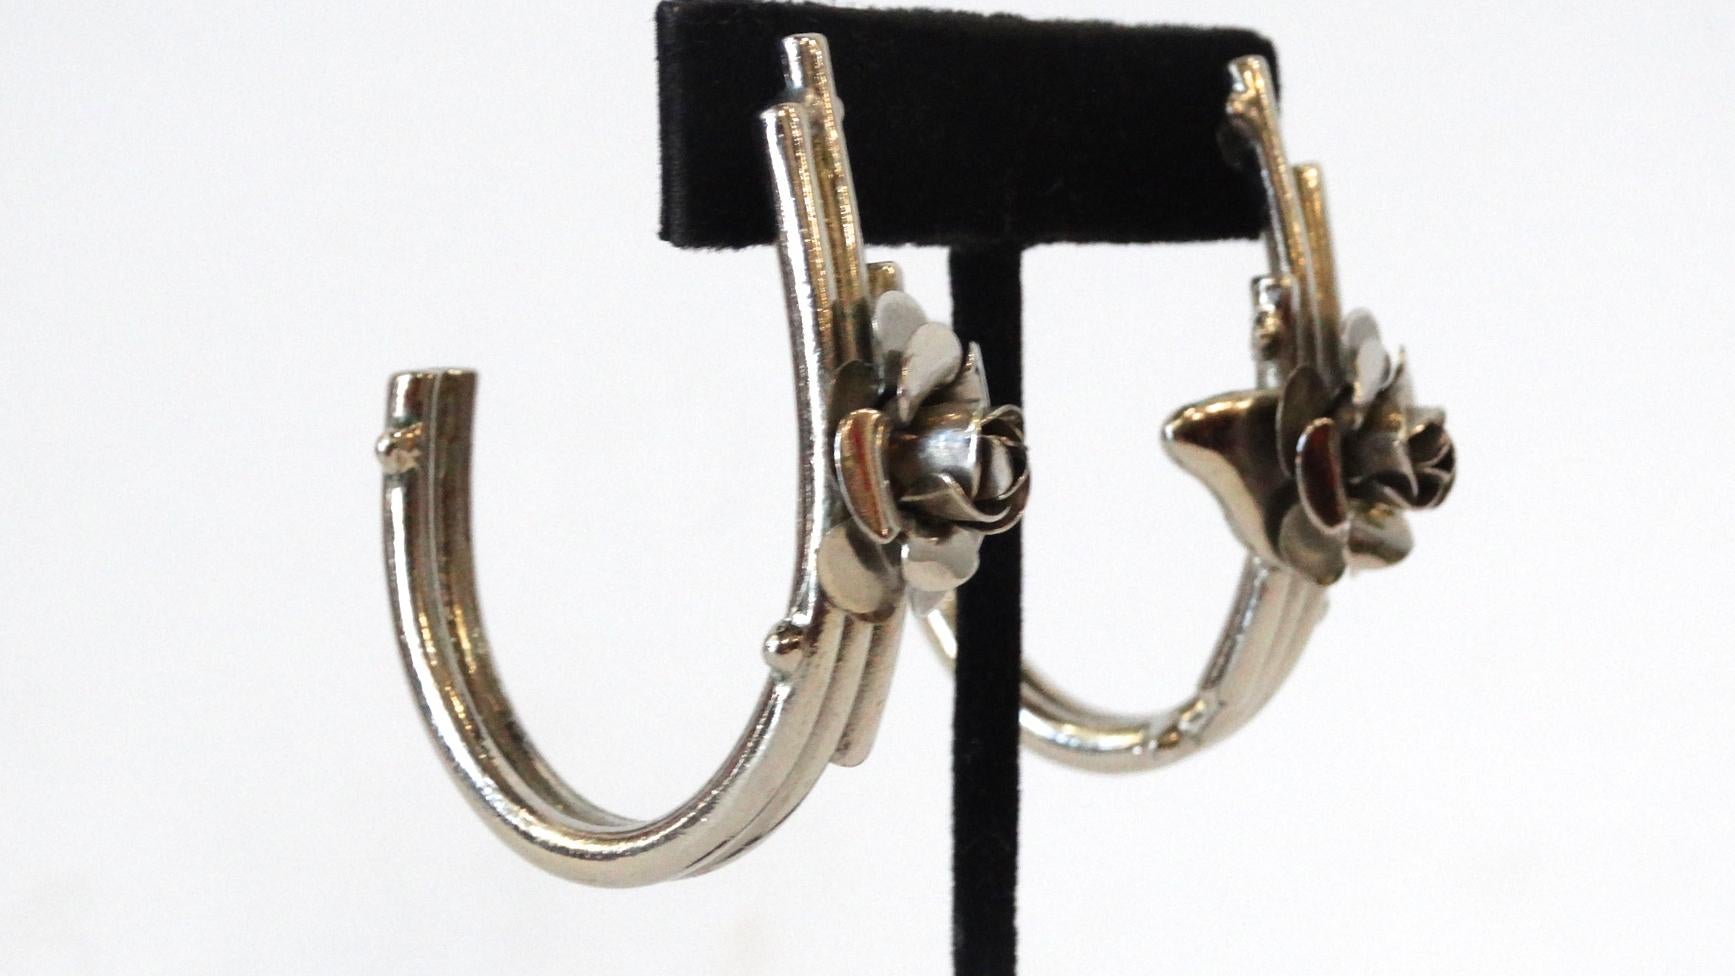 The most adorable pair of silver hoops from prolific designer Gianni Versace! Vintage silver Versace is hard to come by- these pieces are exceptionally special as they come inspired by the S/S 1986 Versace collection. Layered, silver hoops adorned